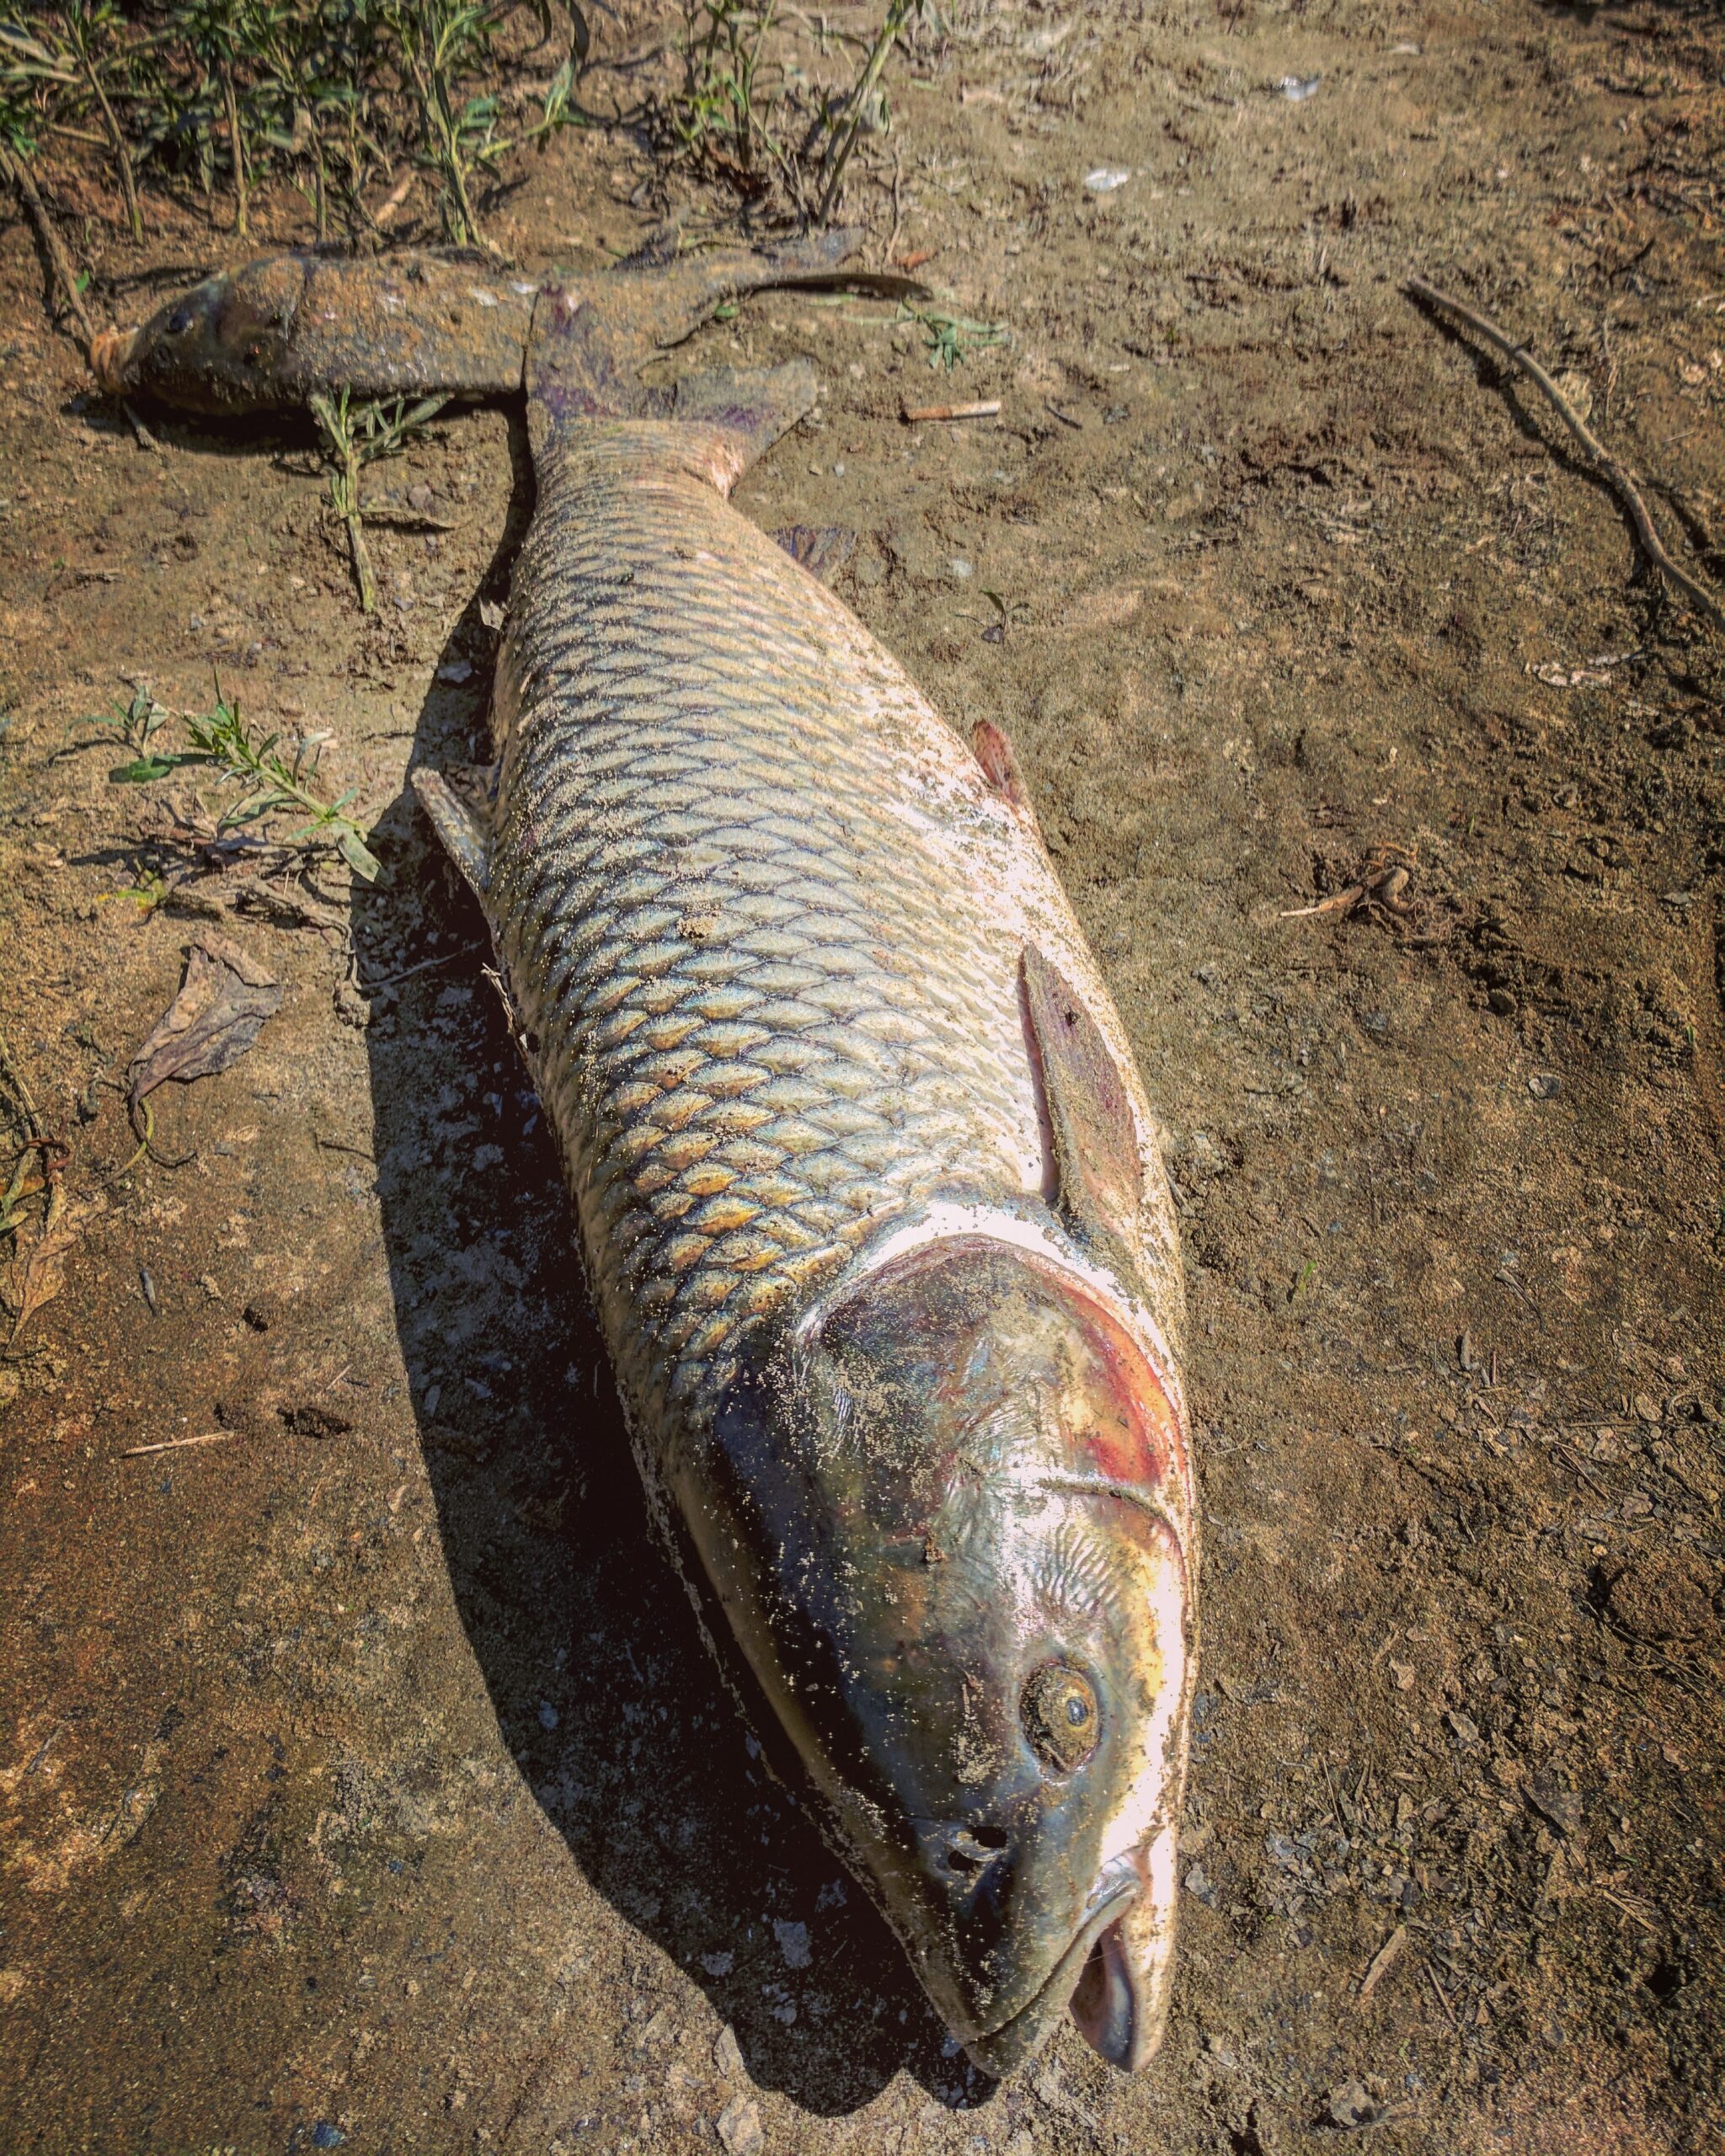 Target grass carp from the banks of lakes and ponds.